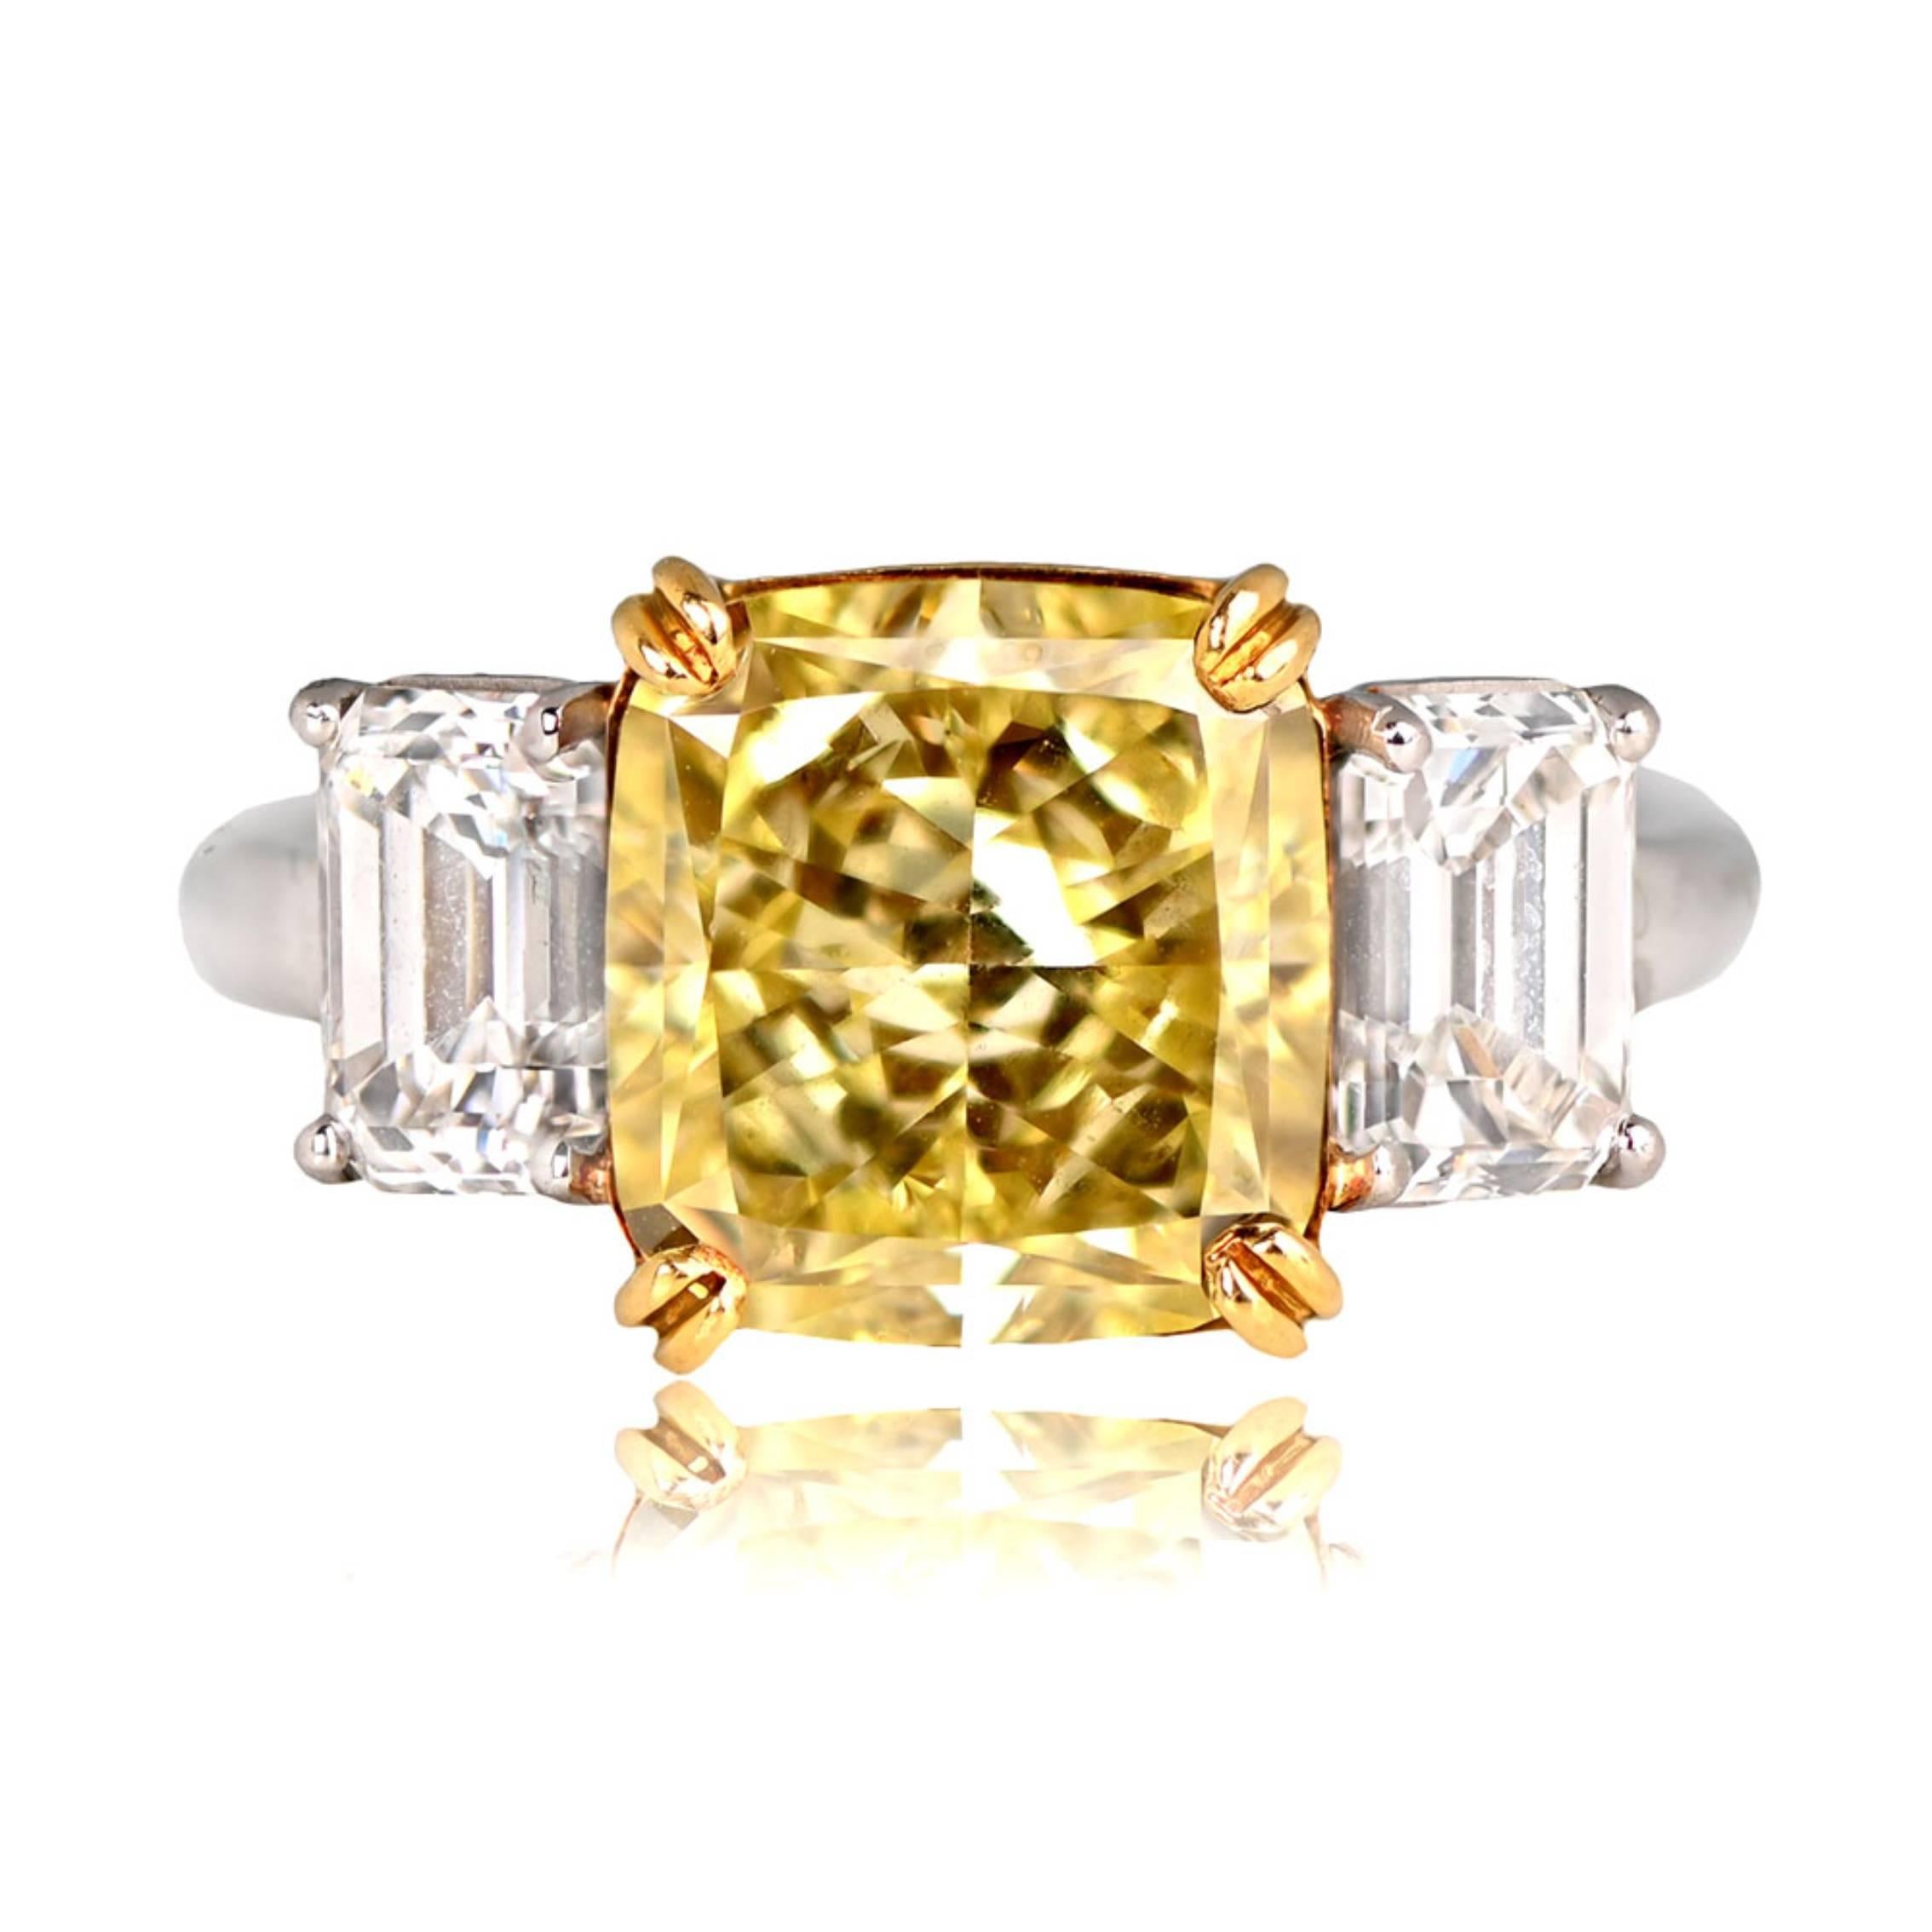 A striking three-stone diamond ring with a 5.78-carat natural Fancy Yellow radiant cut diamond, VS2 clarity. Flanking the center stone are two emerald-cut diamonds, approximately 0.75 carats each. The center diamond is prong-set in yellow gold,